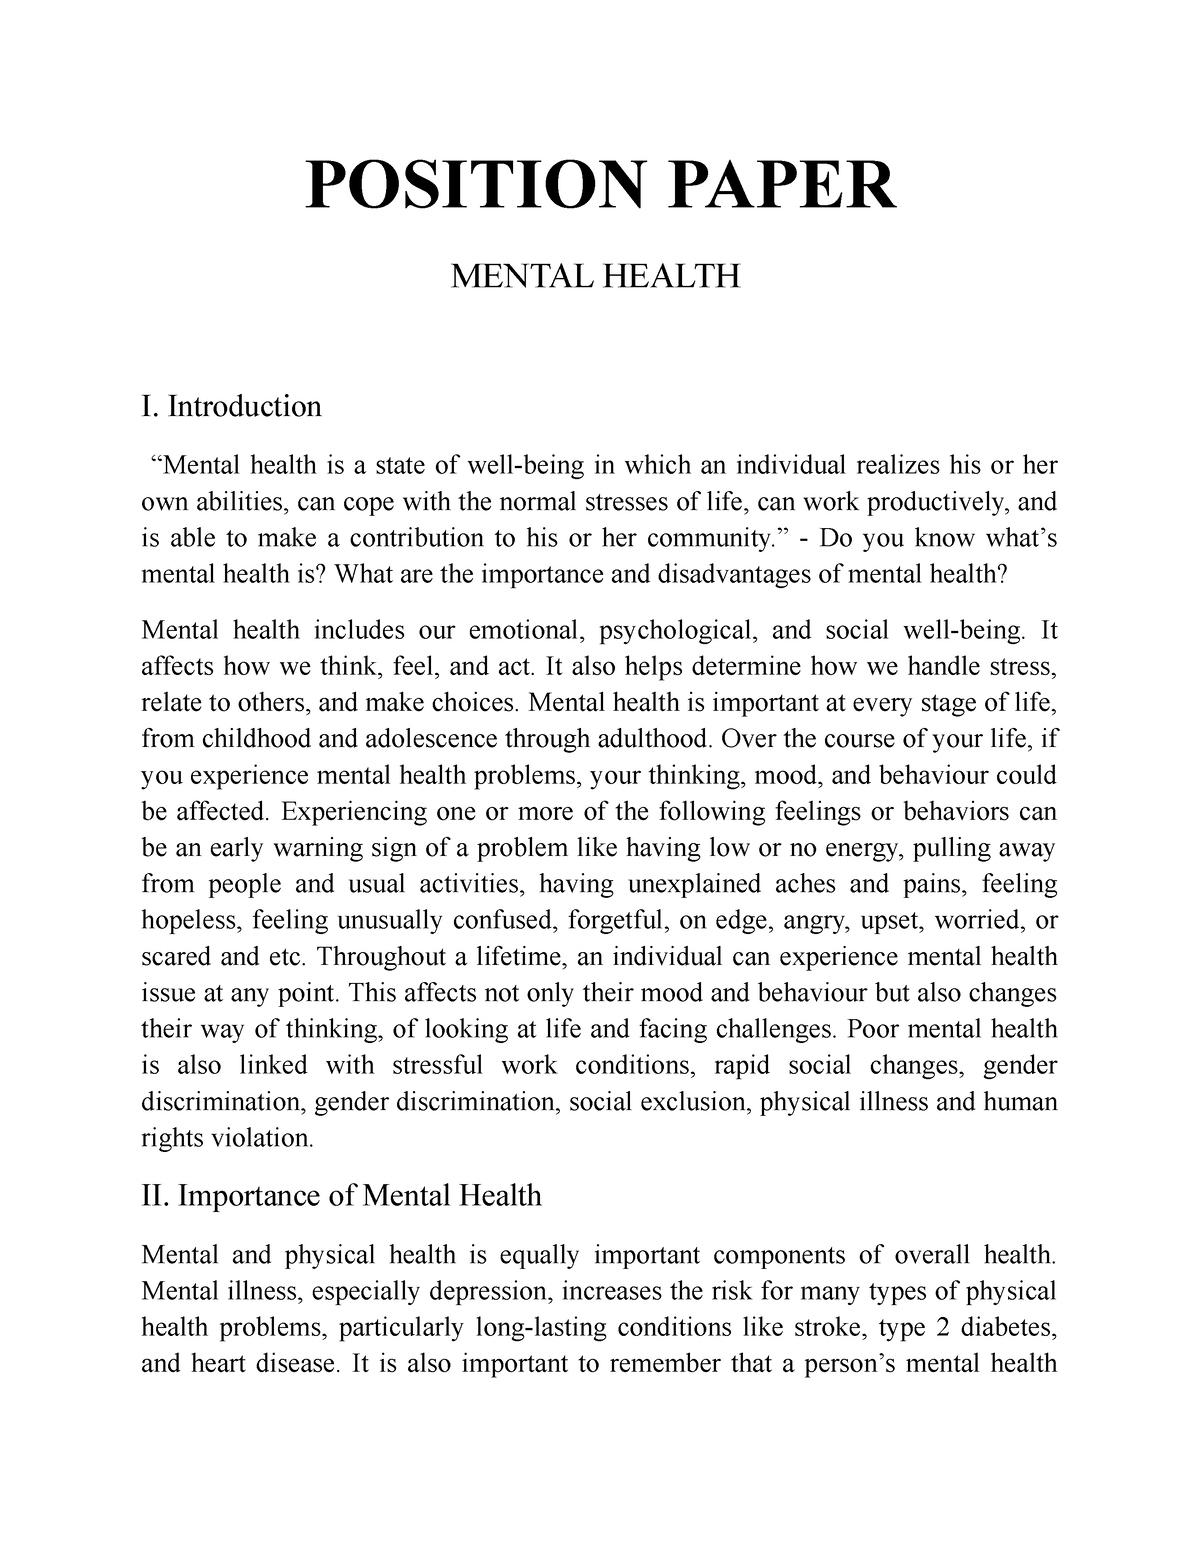 research paper on behavioral health